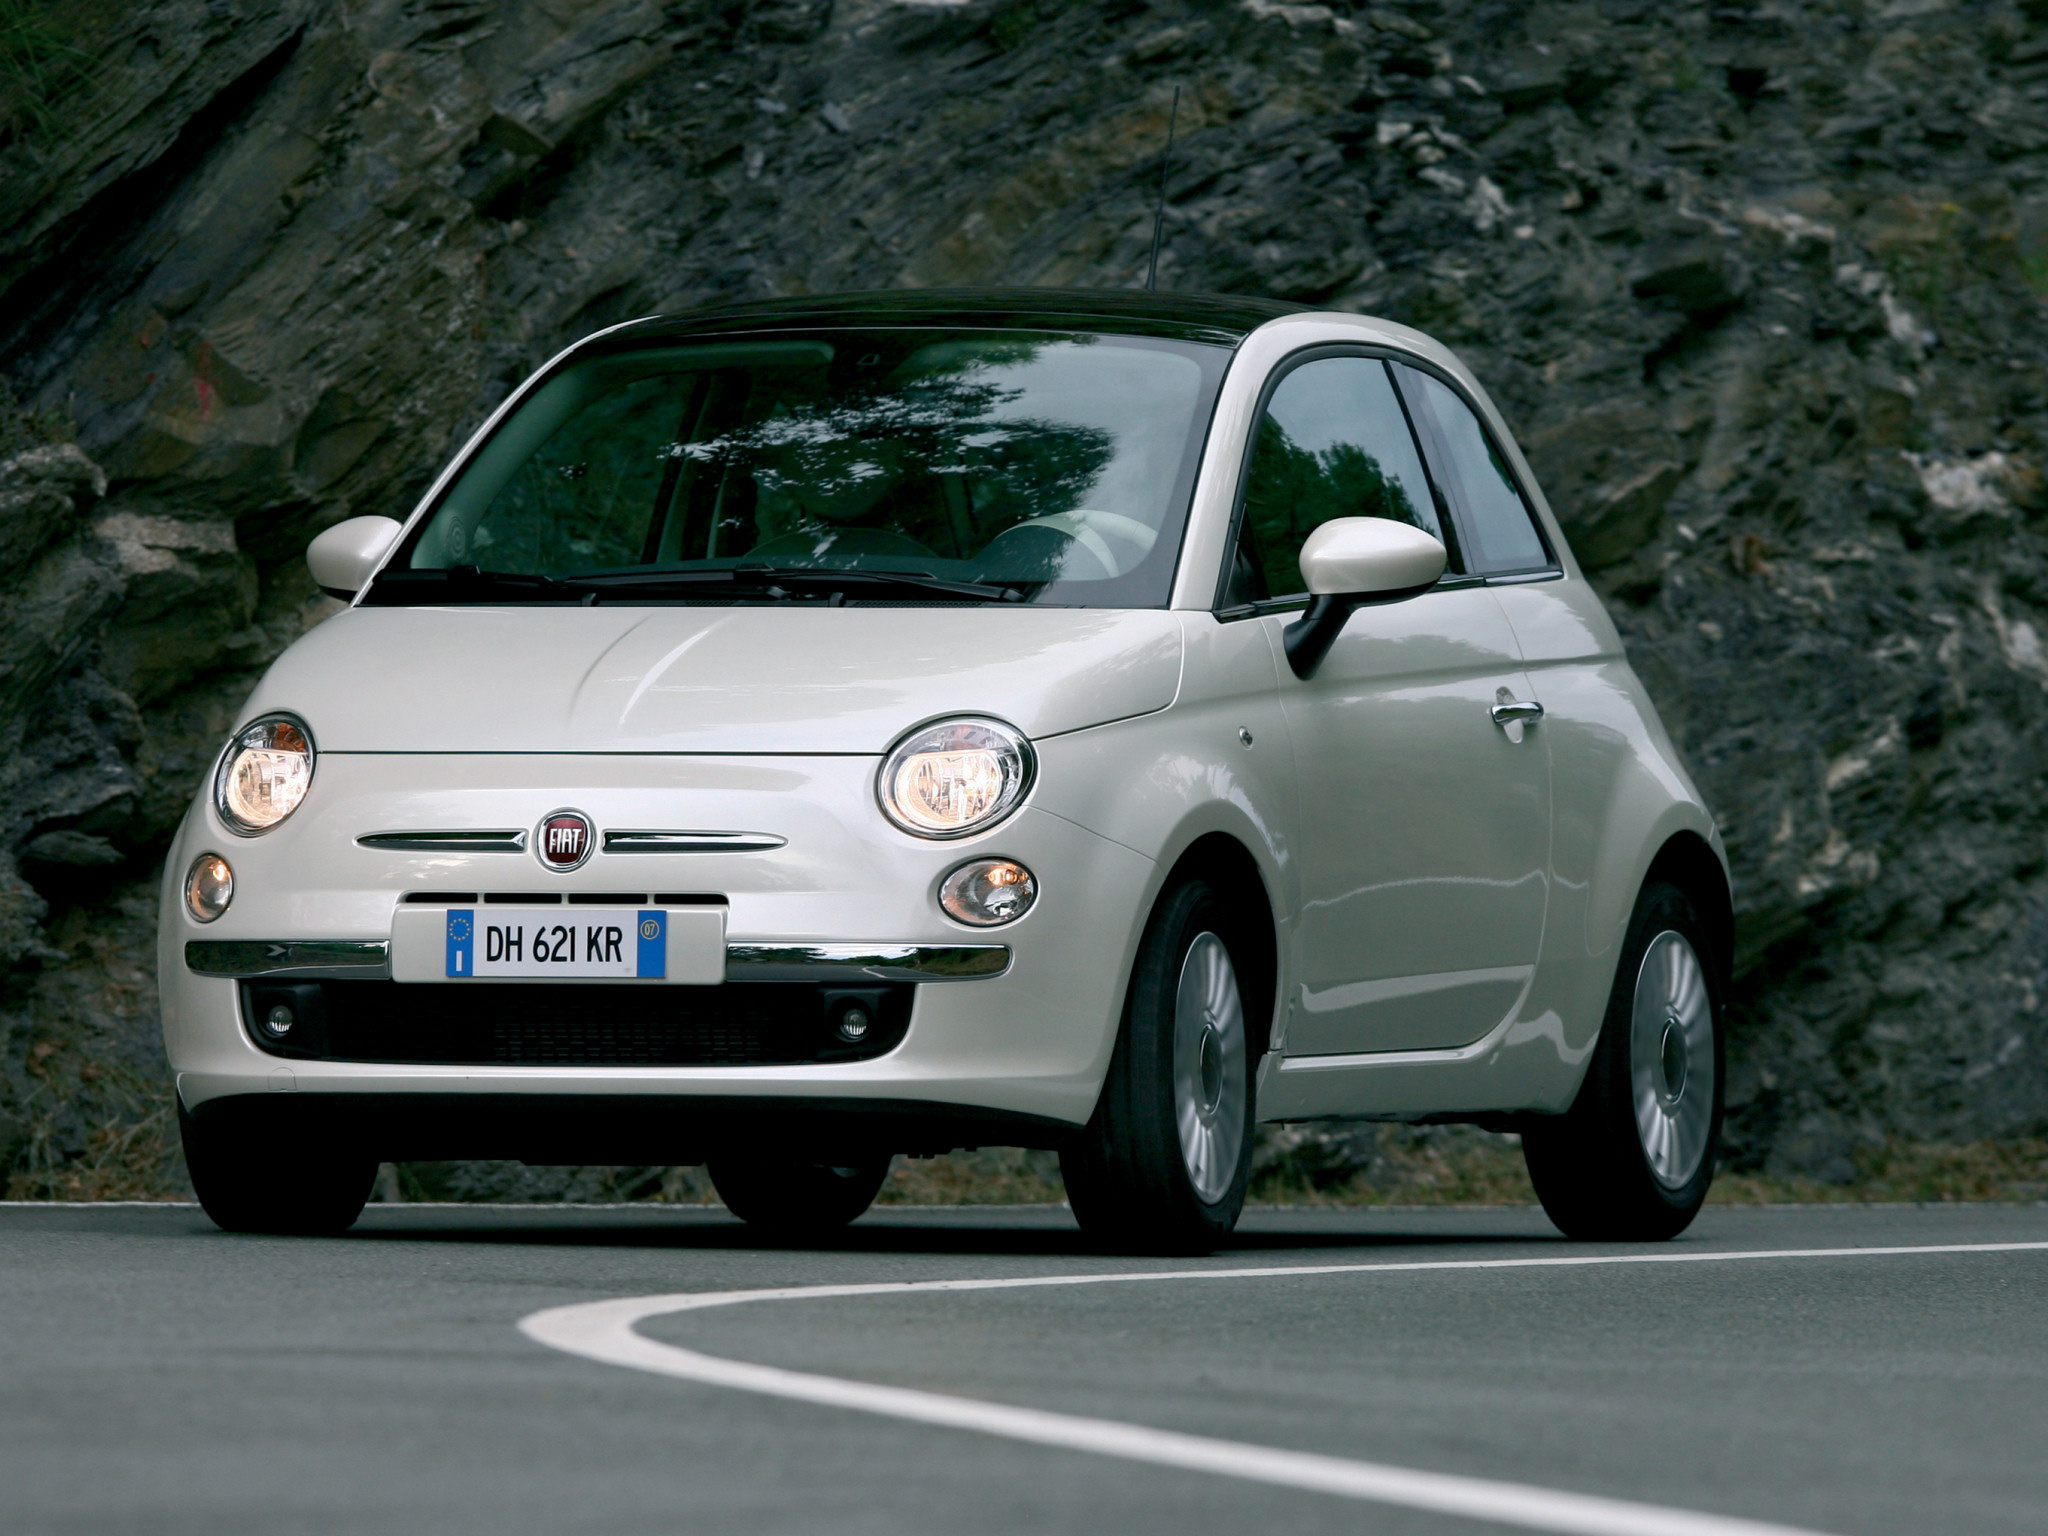 Car in pictures car photo gallery » Fiat 500 2007 Photo 11